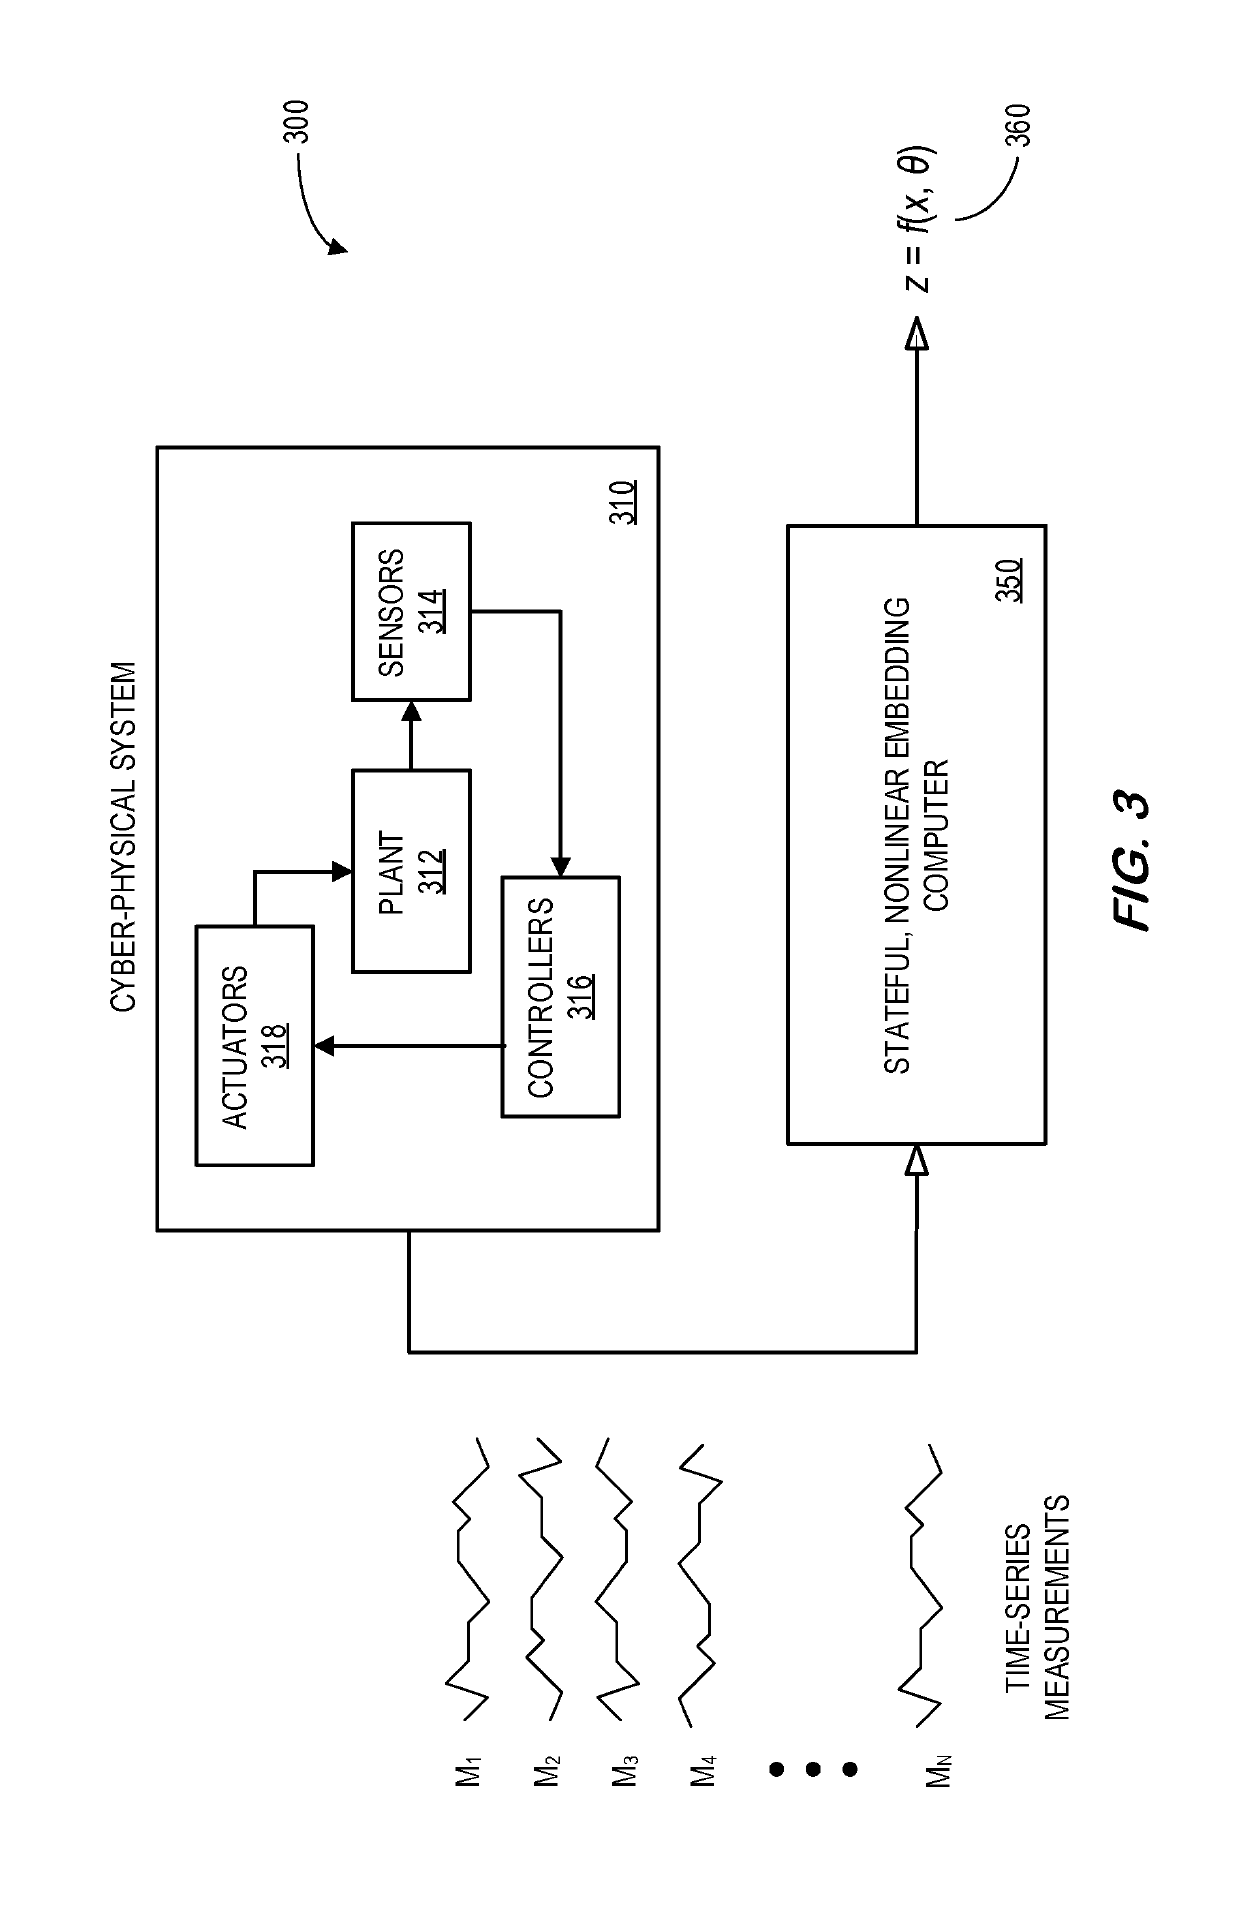 System and method for abstracting characteristics of cyber-physical systems